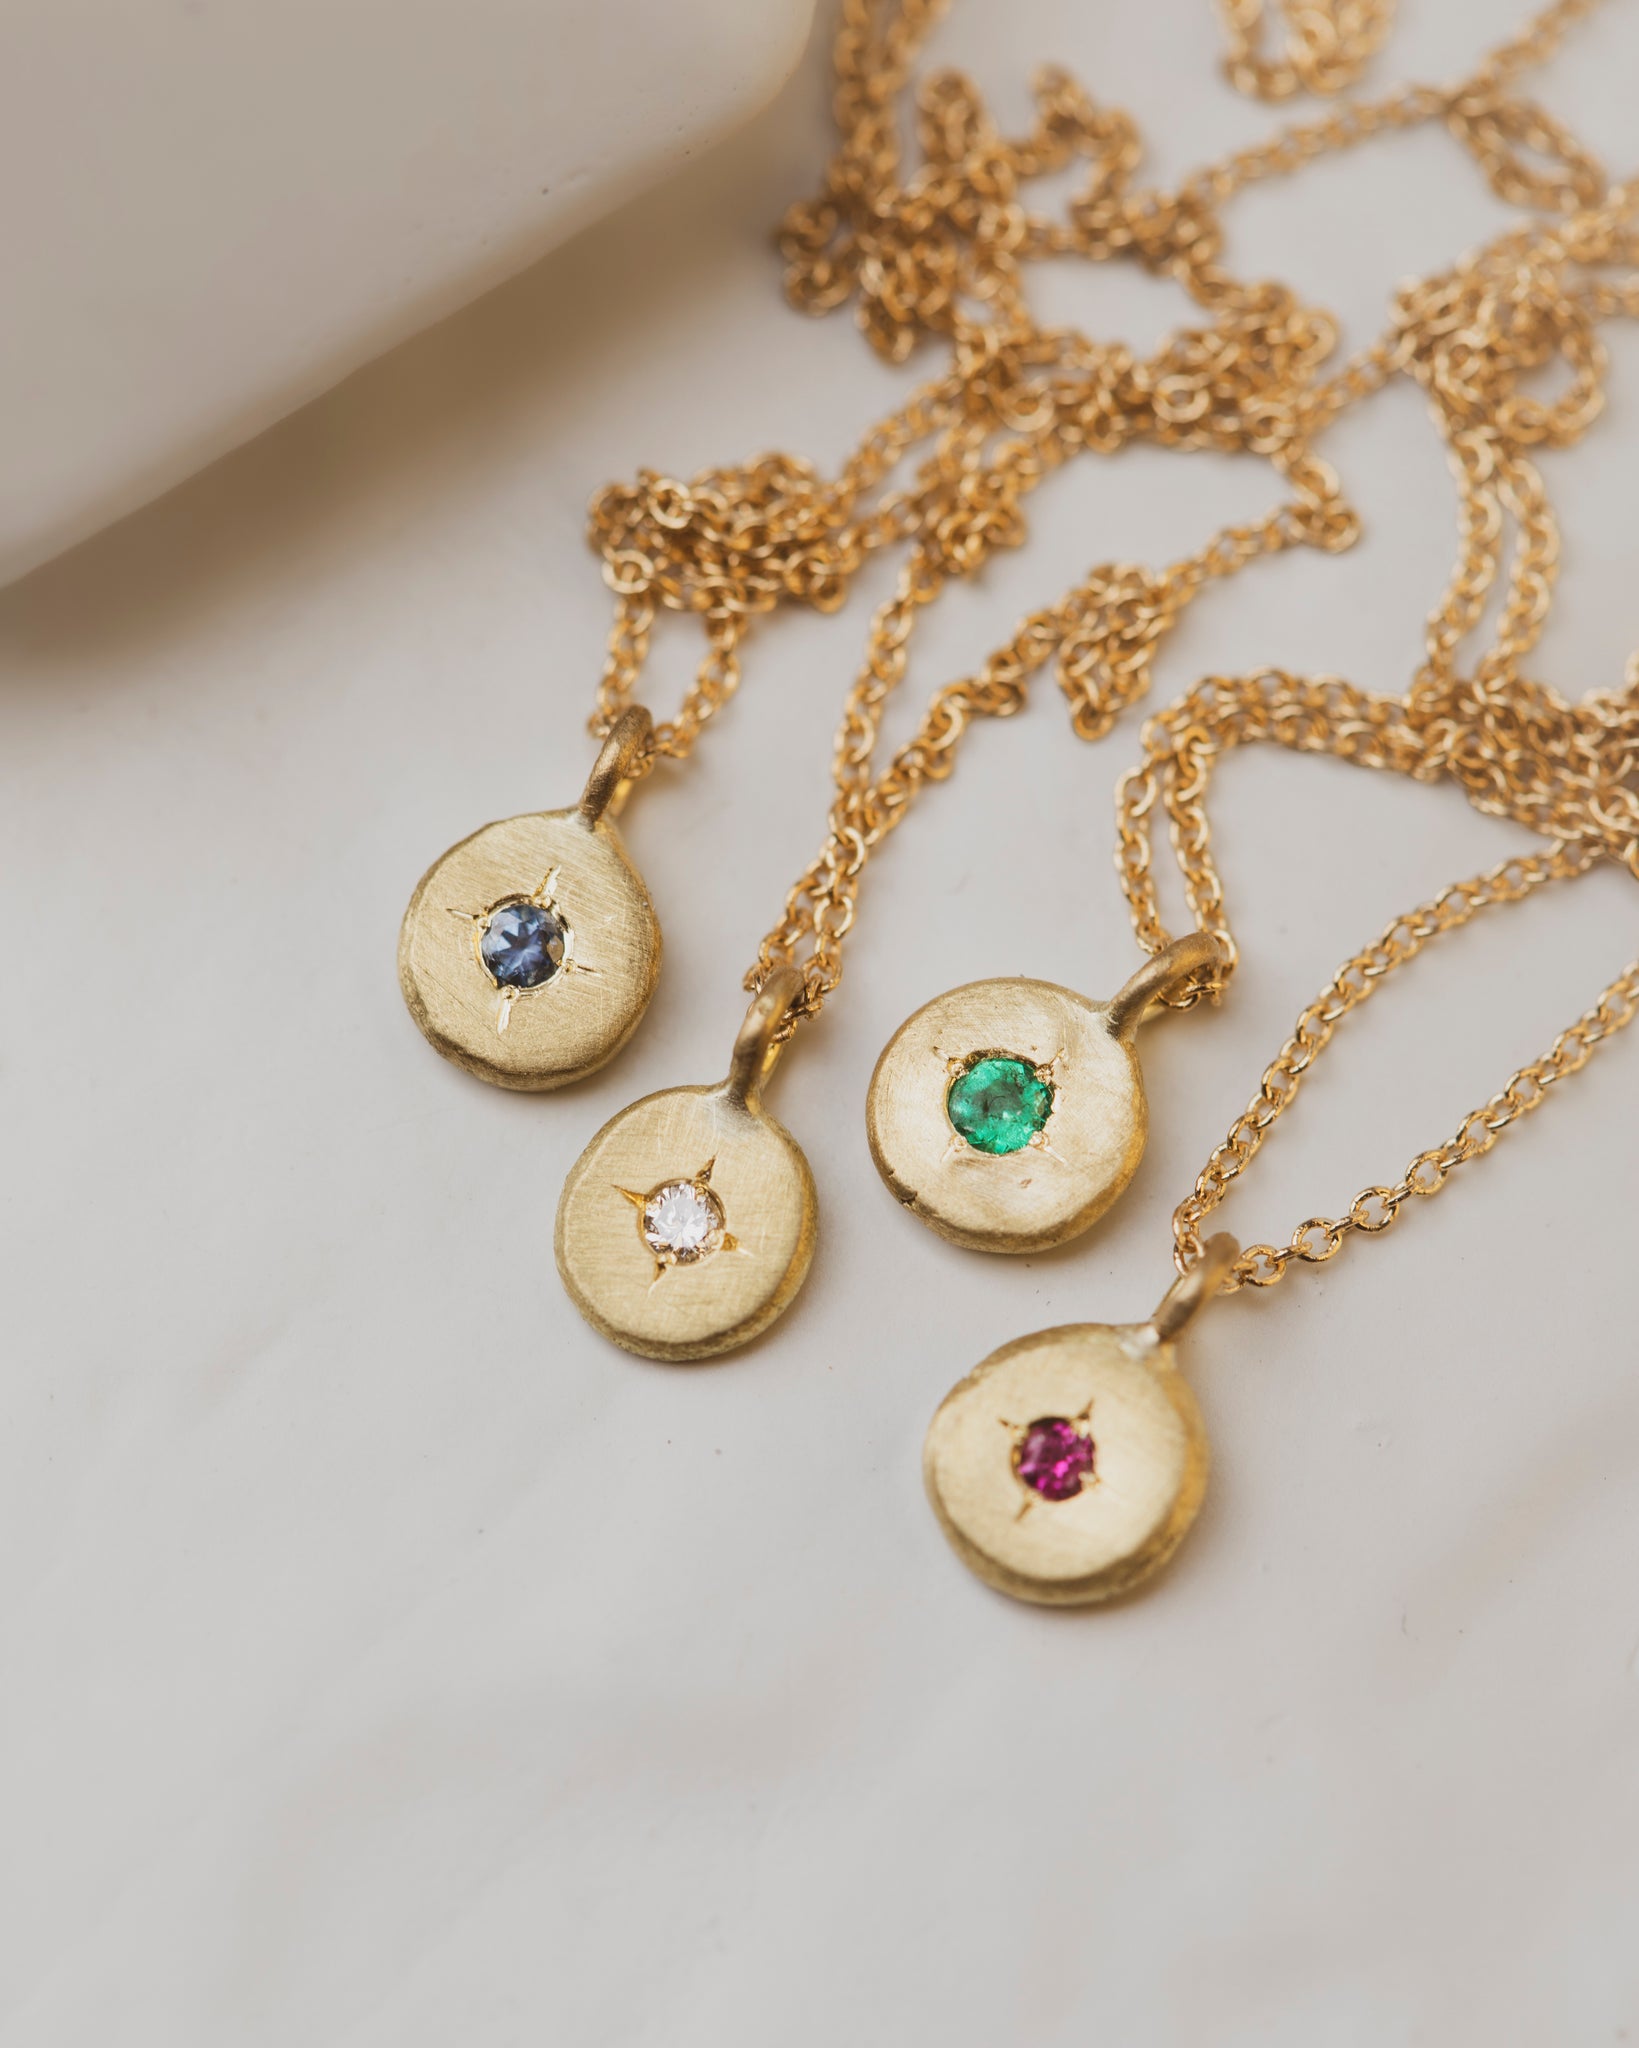 18K yellow gold pebble gemstone necklaces with a diamond, sapphire, emerald or ruby in the center. 5mm round with 2mm gemstone